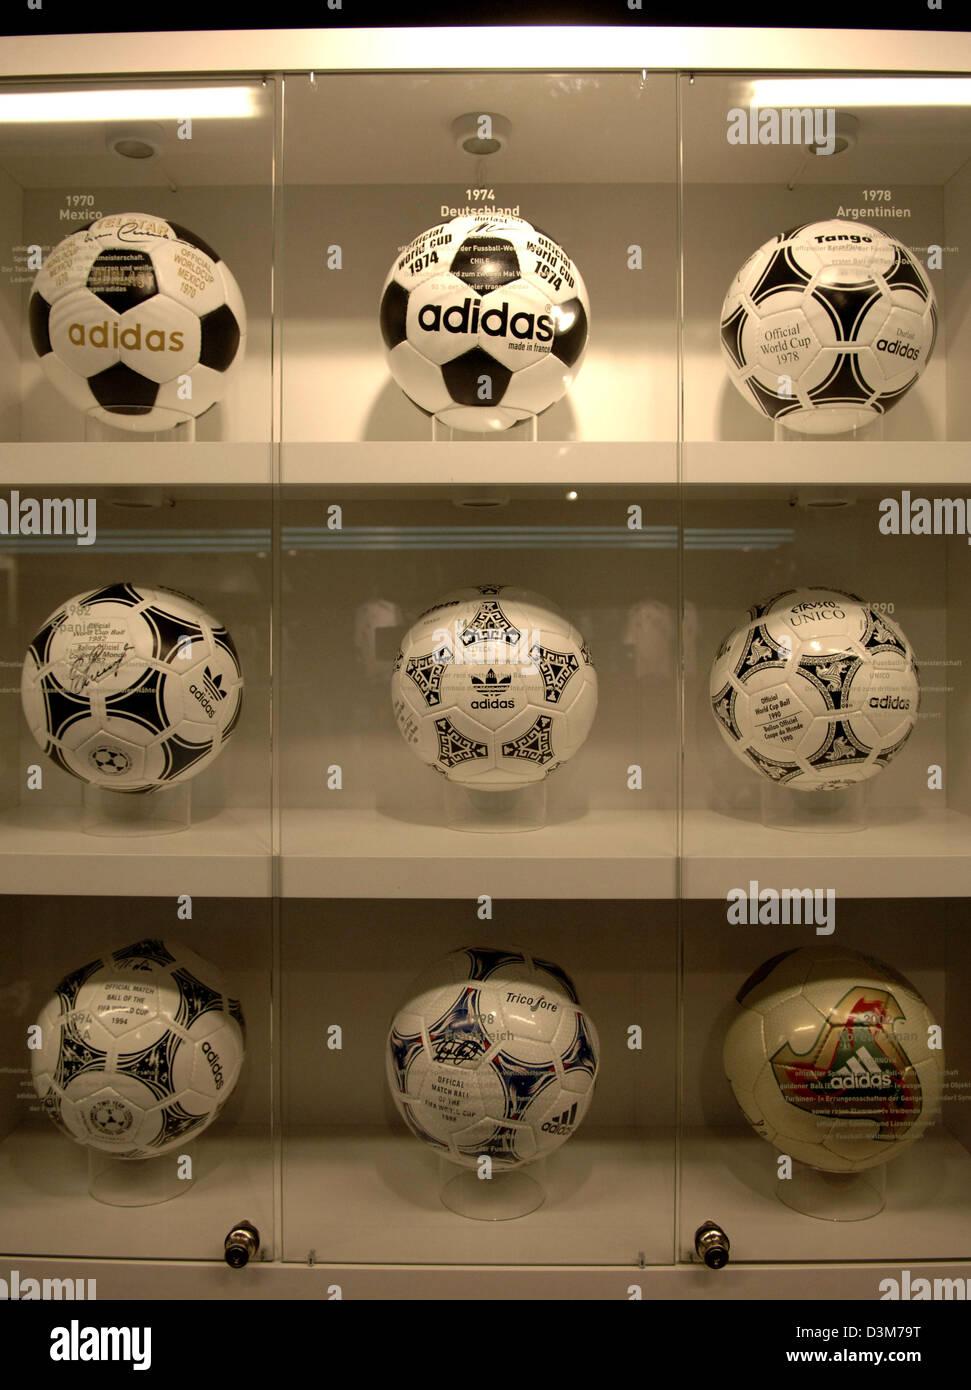 avión Persona a cargo hardware dpa) - All of the previous official World Cup soccer balls, which sporting  goods manufacturer adidas has produced, are on display in a showcase at the  Karstadt Game and Sports store in